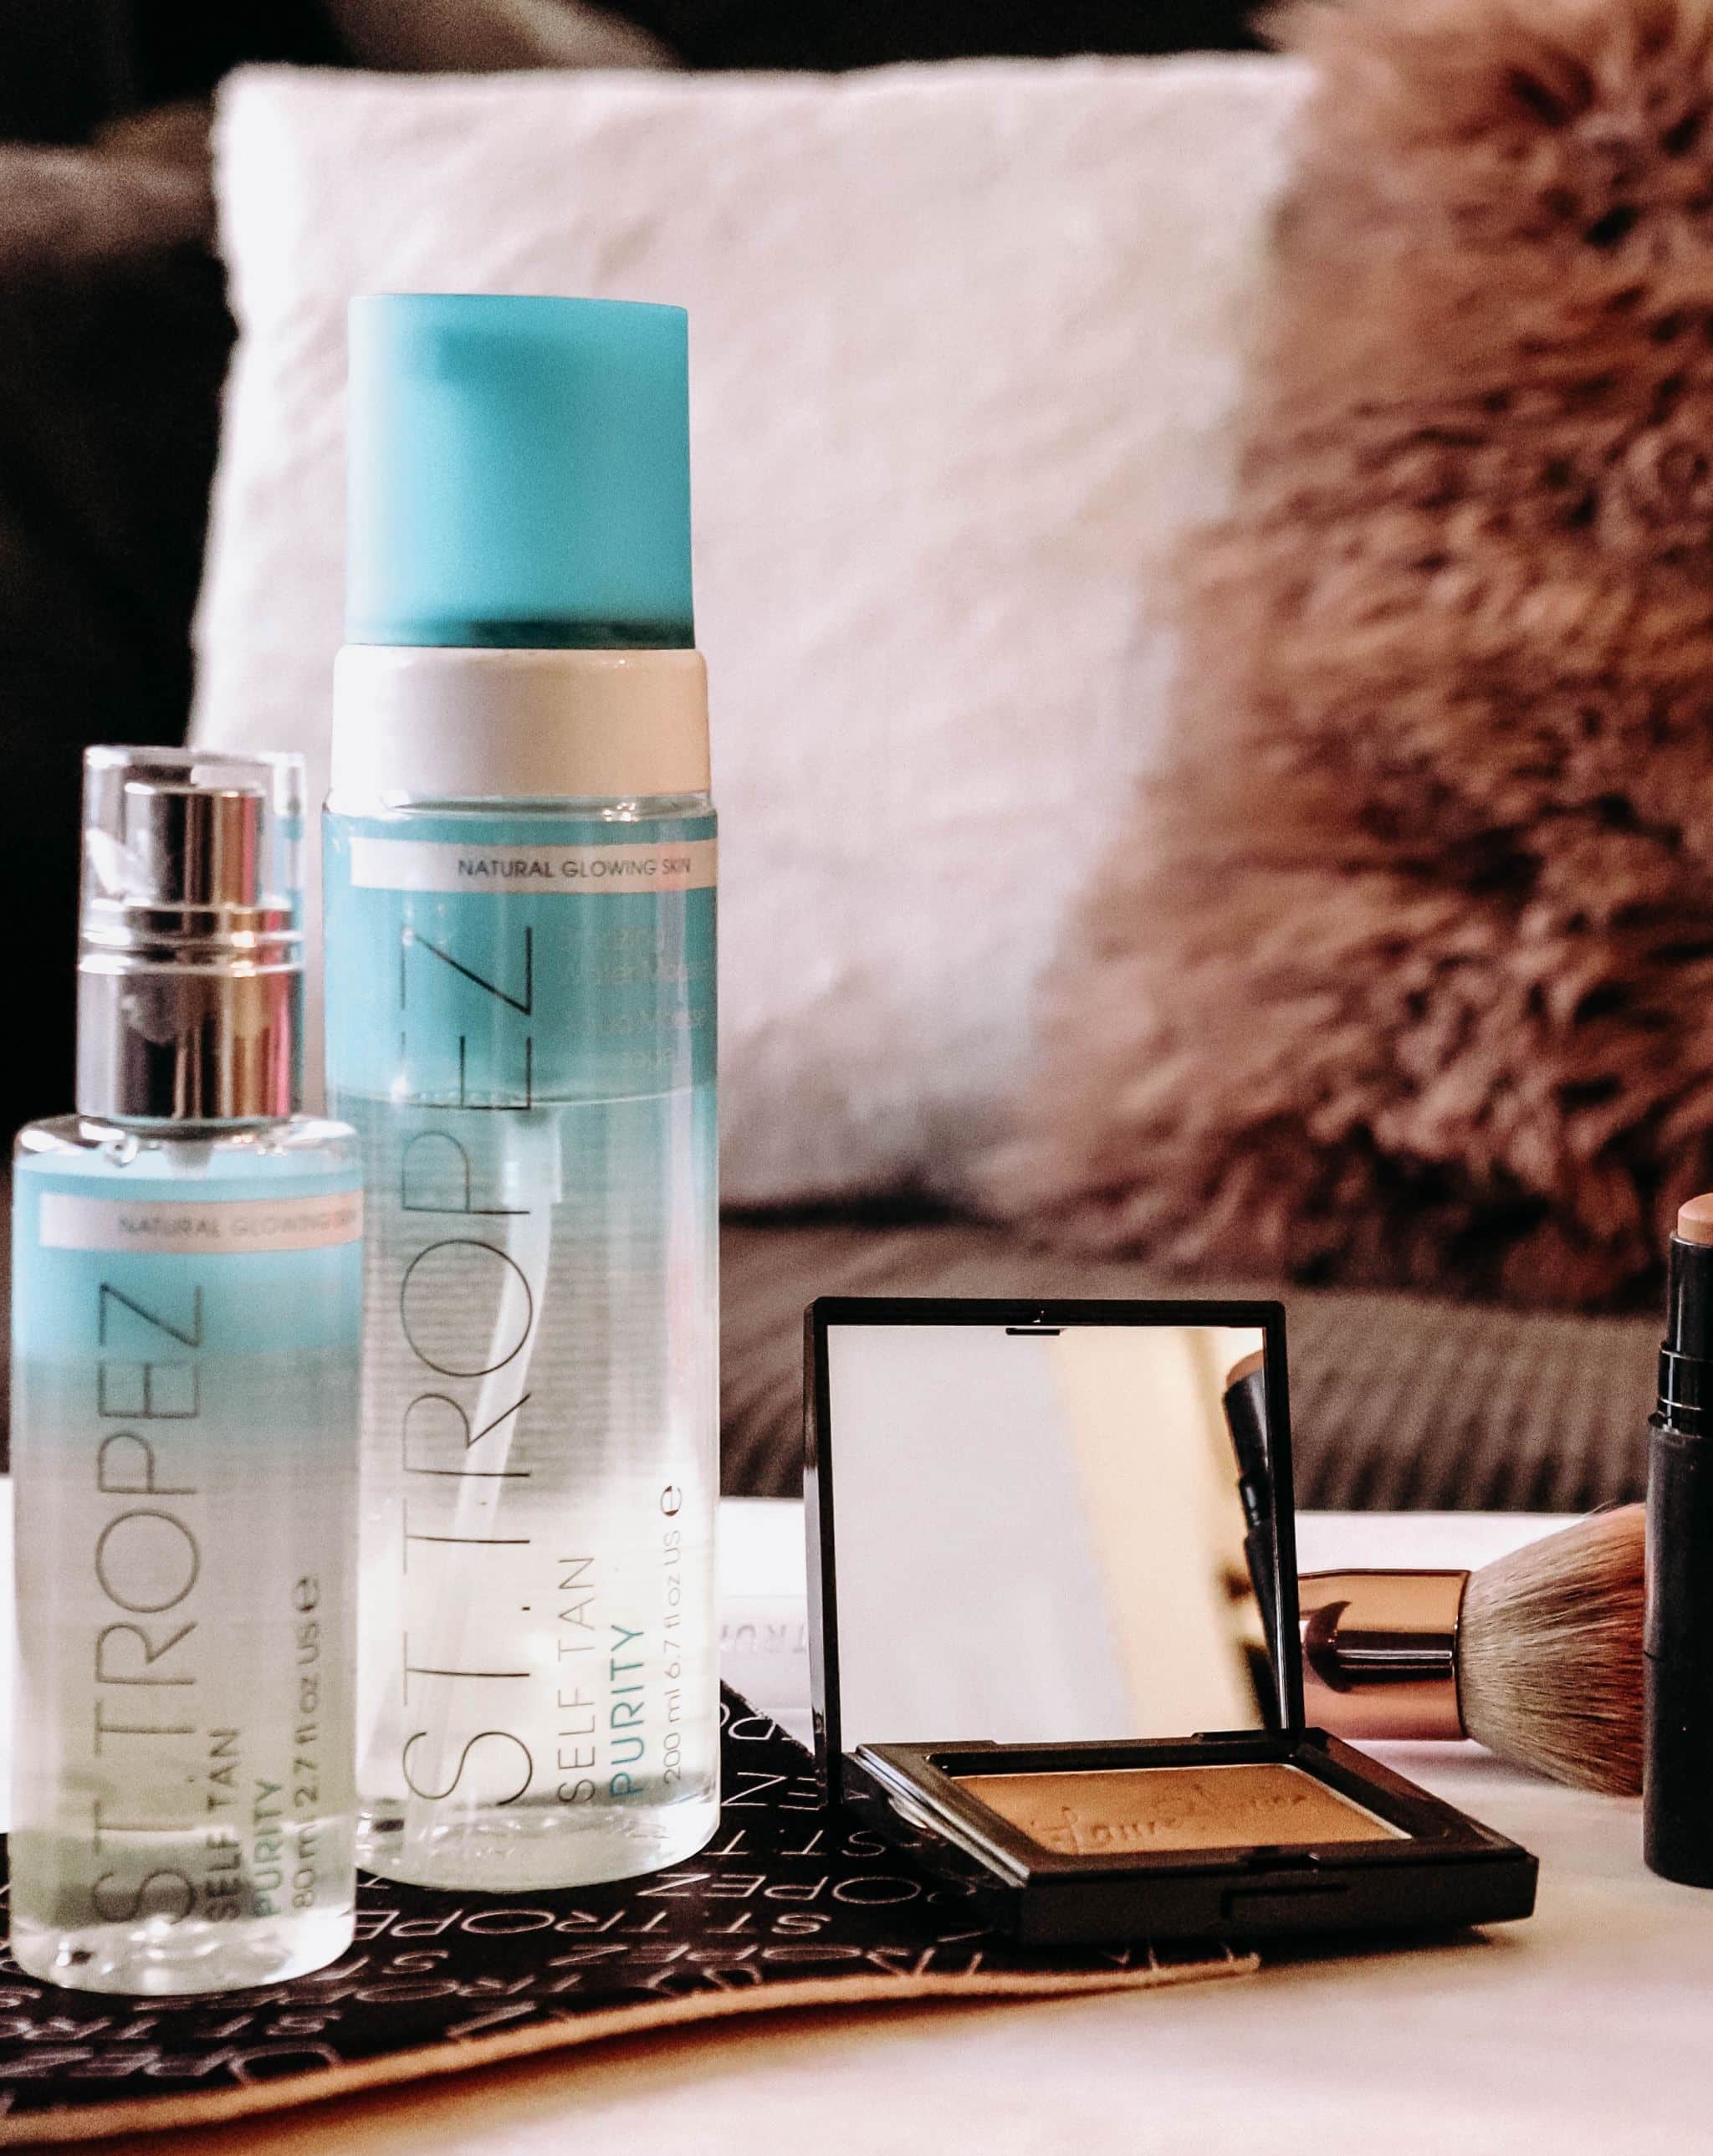 St Tropez Purity Bronzing Water Mouse and Mist Review